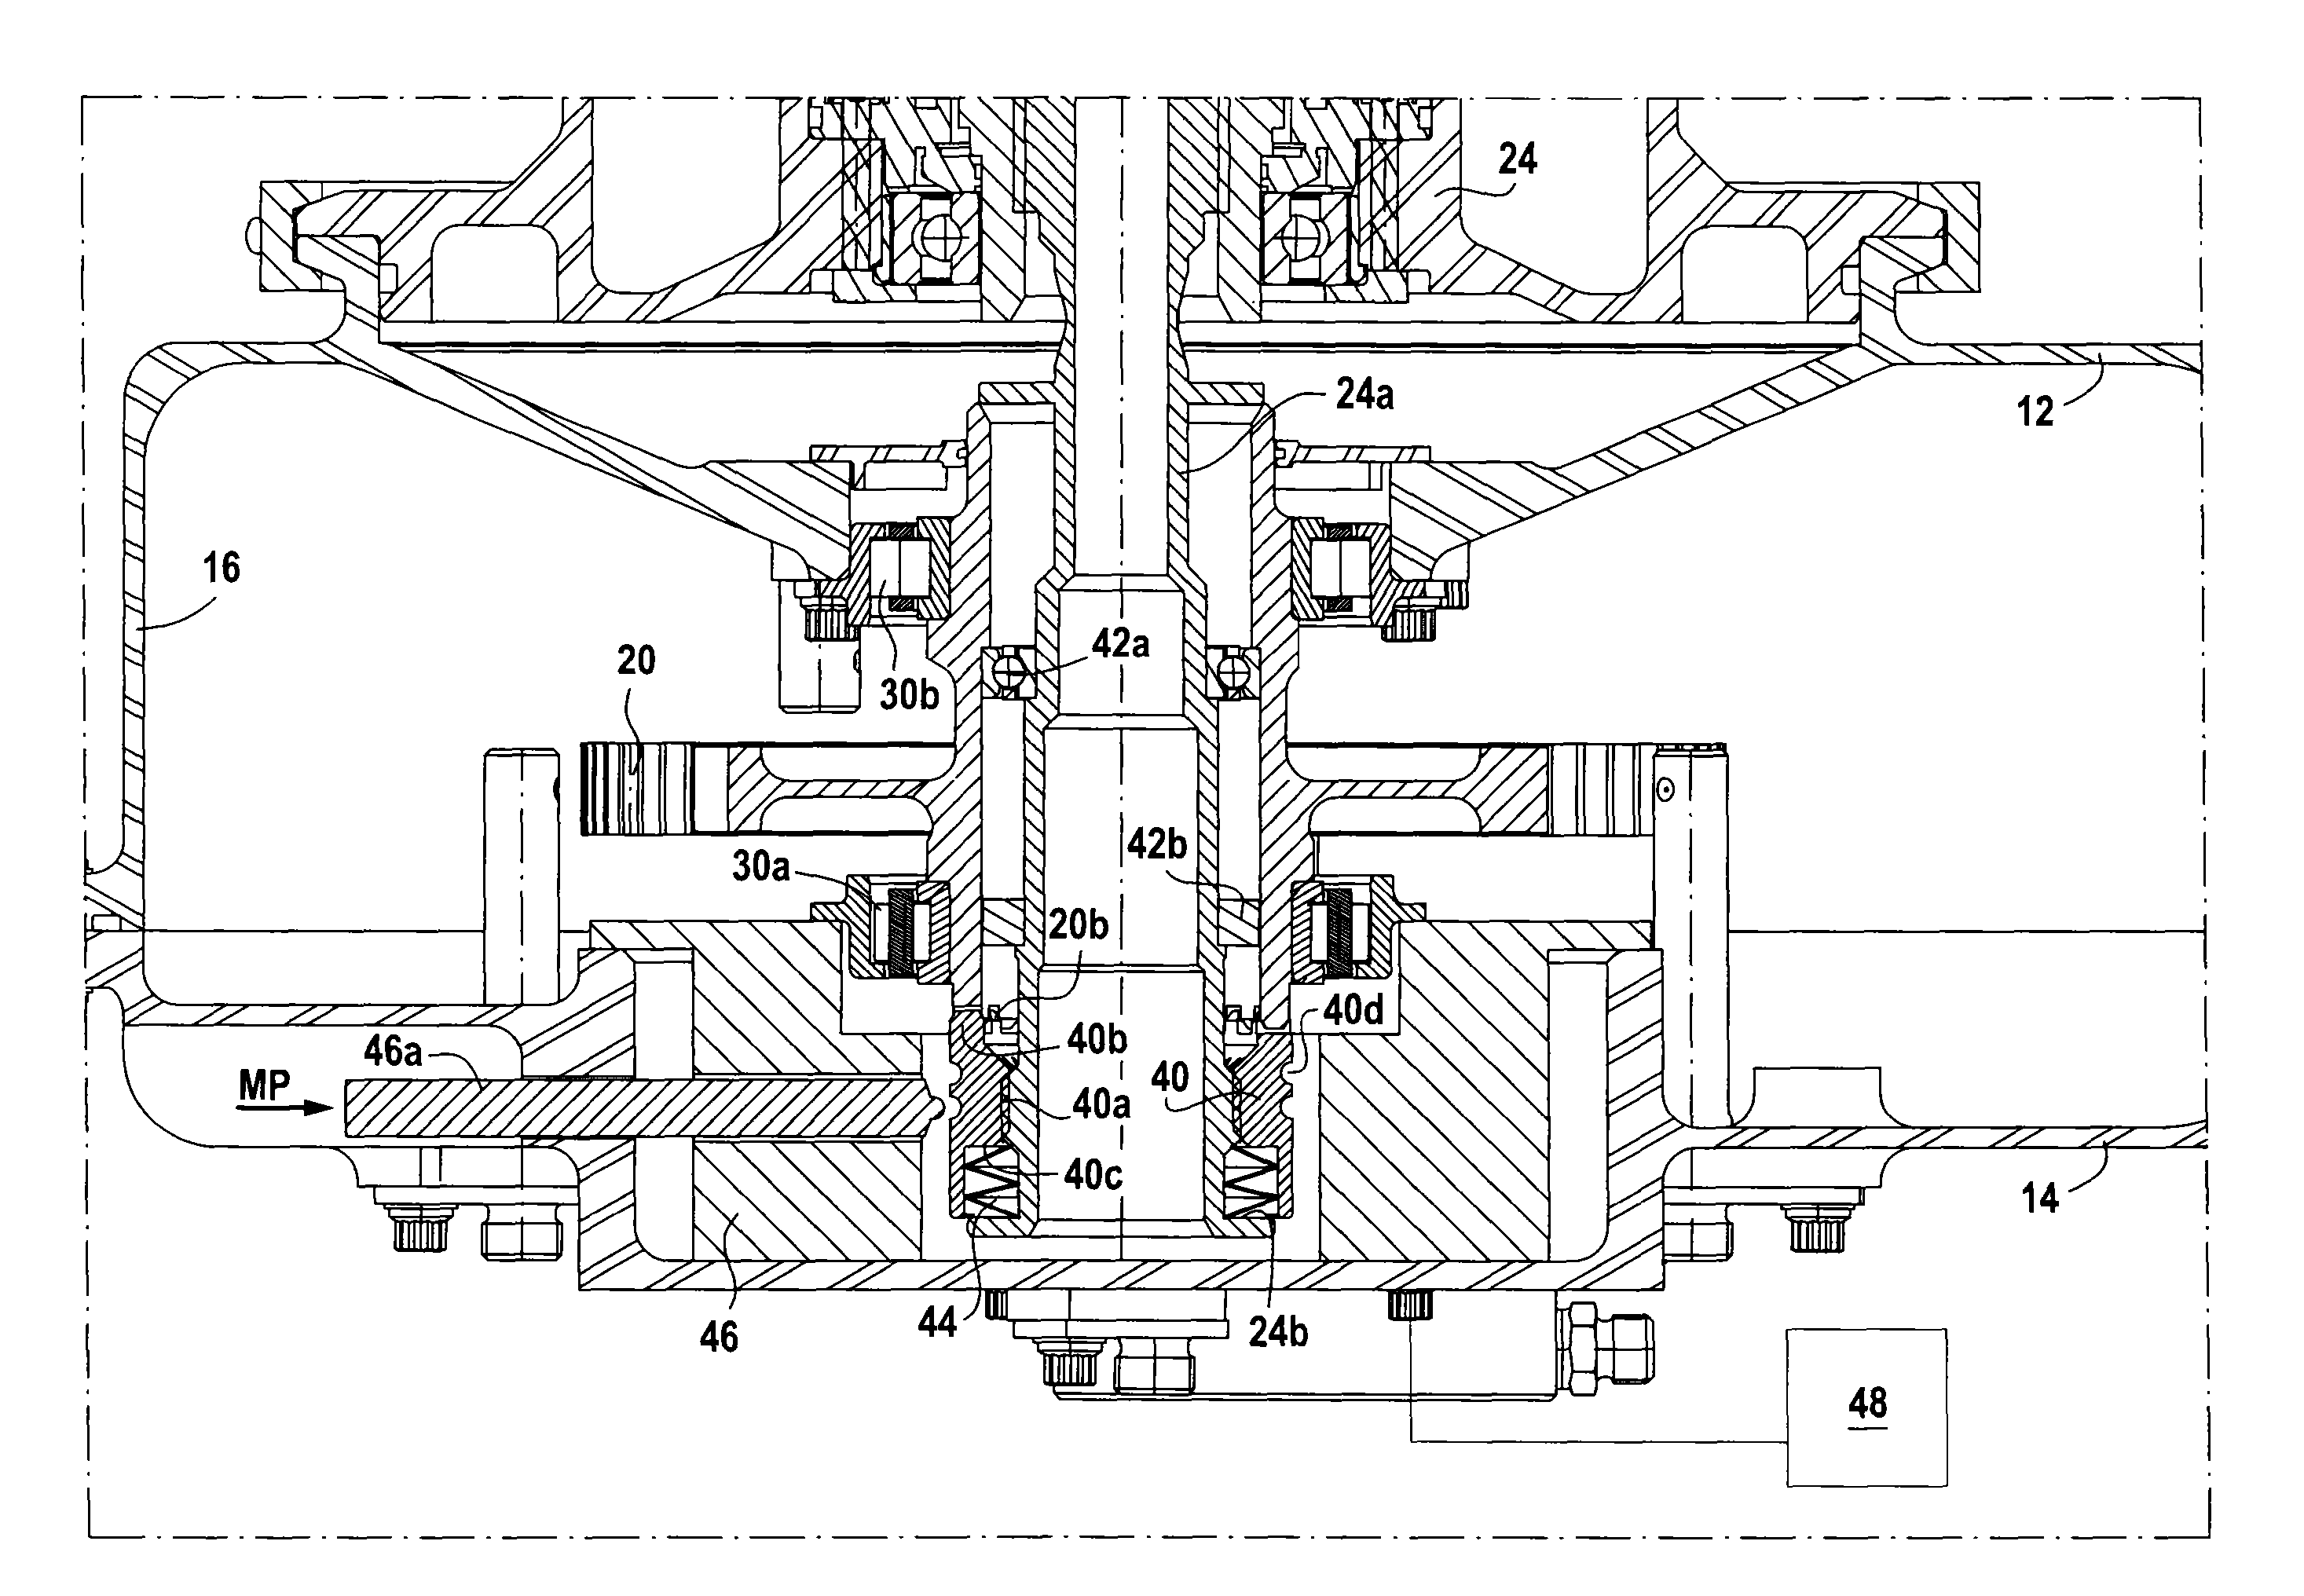 Gas turbine accessory gearbox incorporating decoupling means